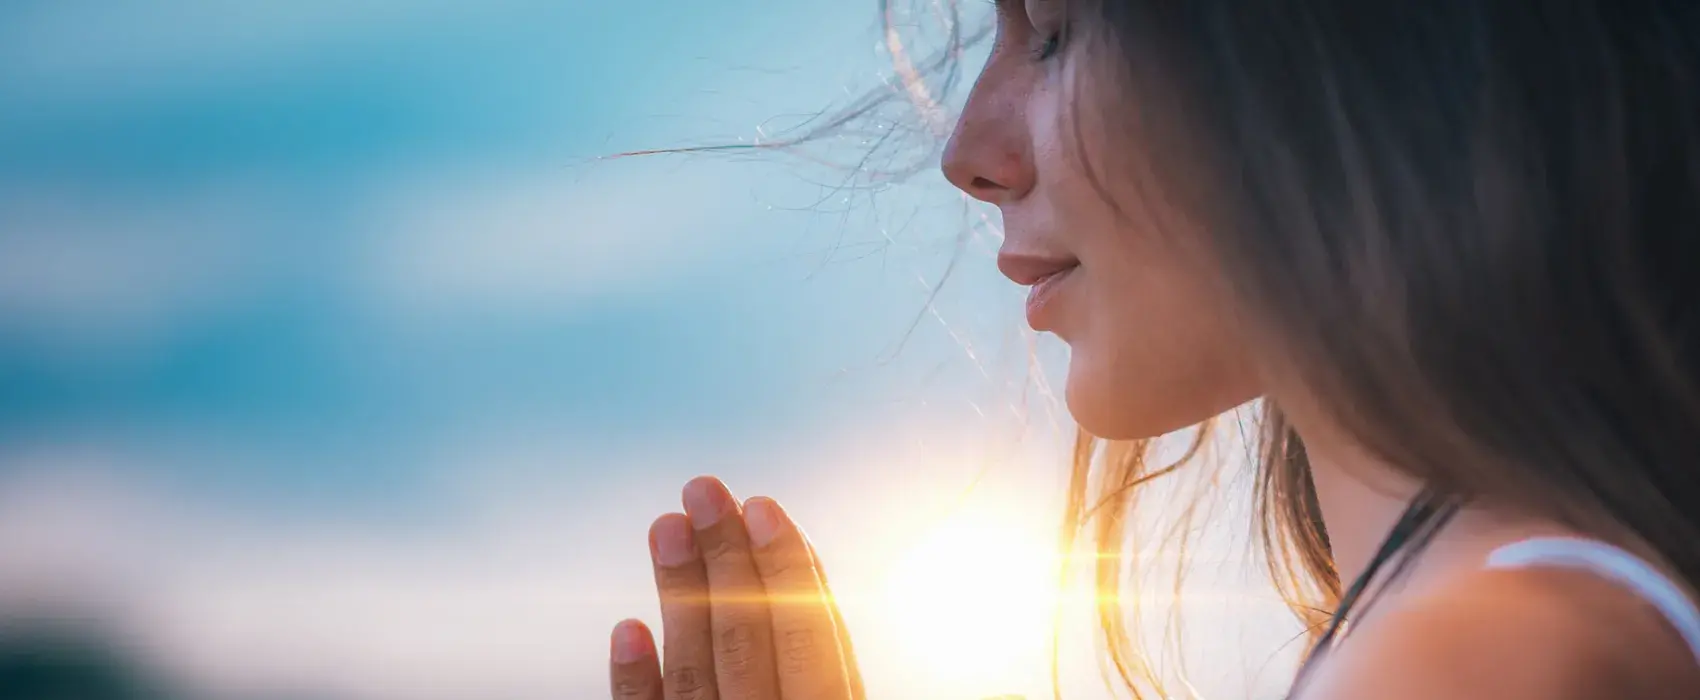 Young woman outside side profile photo eyes closed and hands in prayer with sun in background